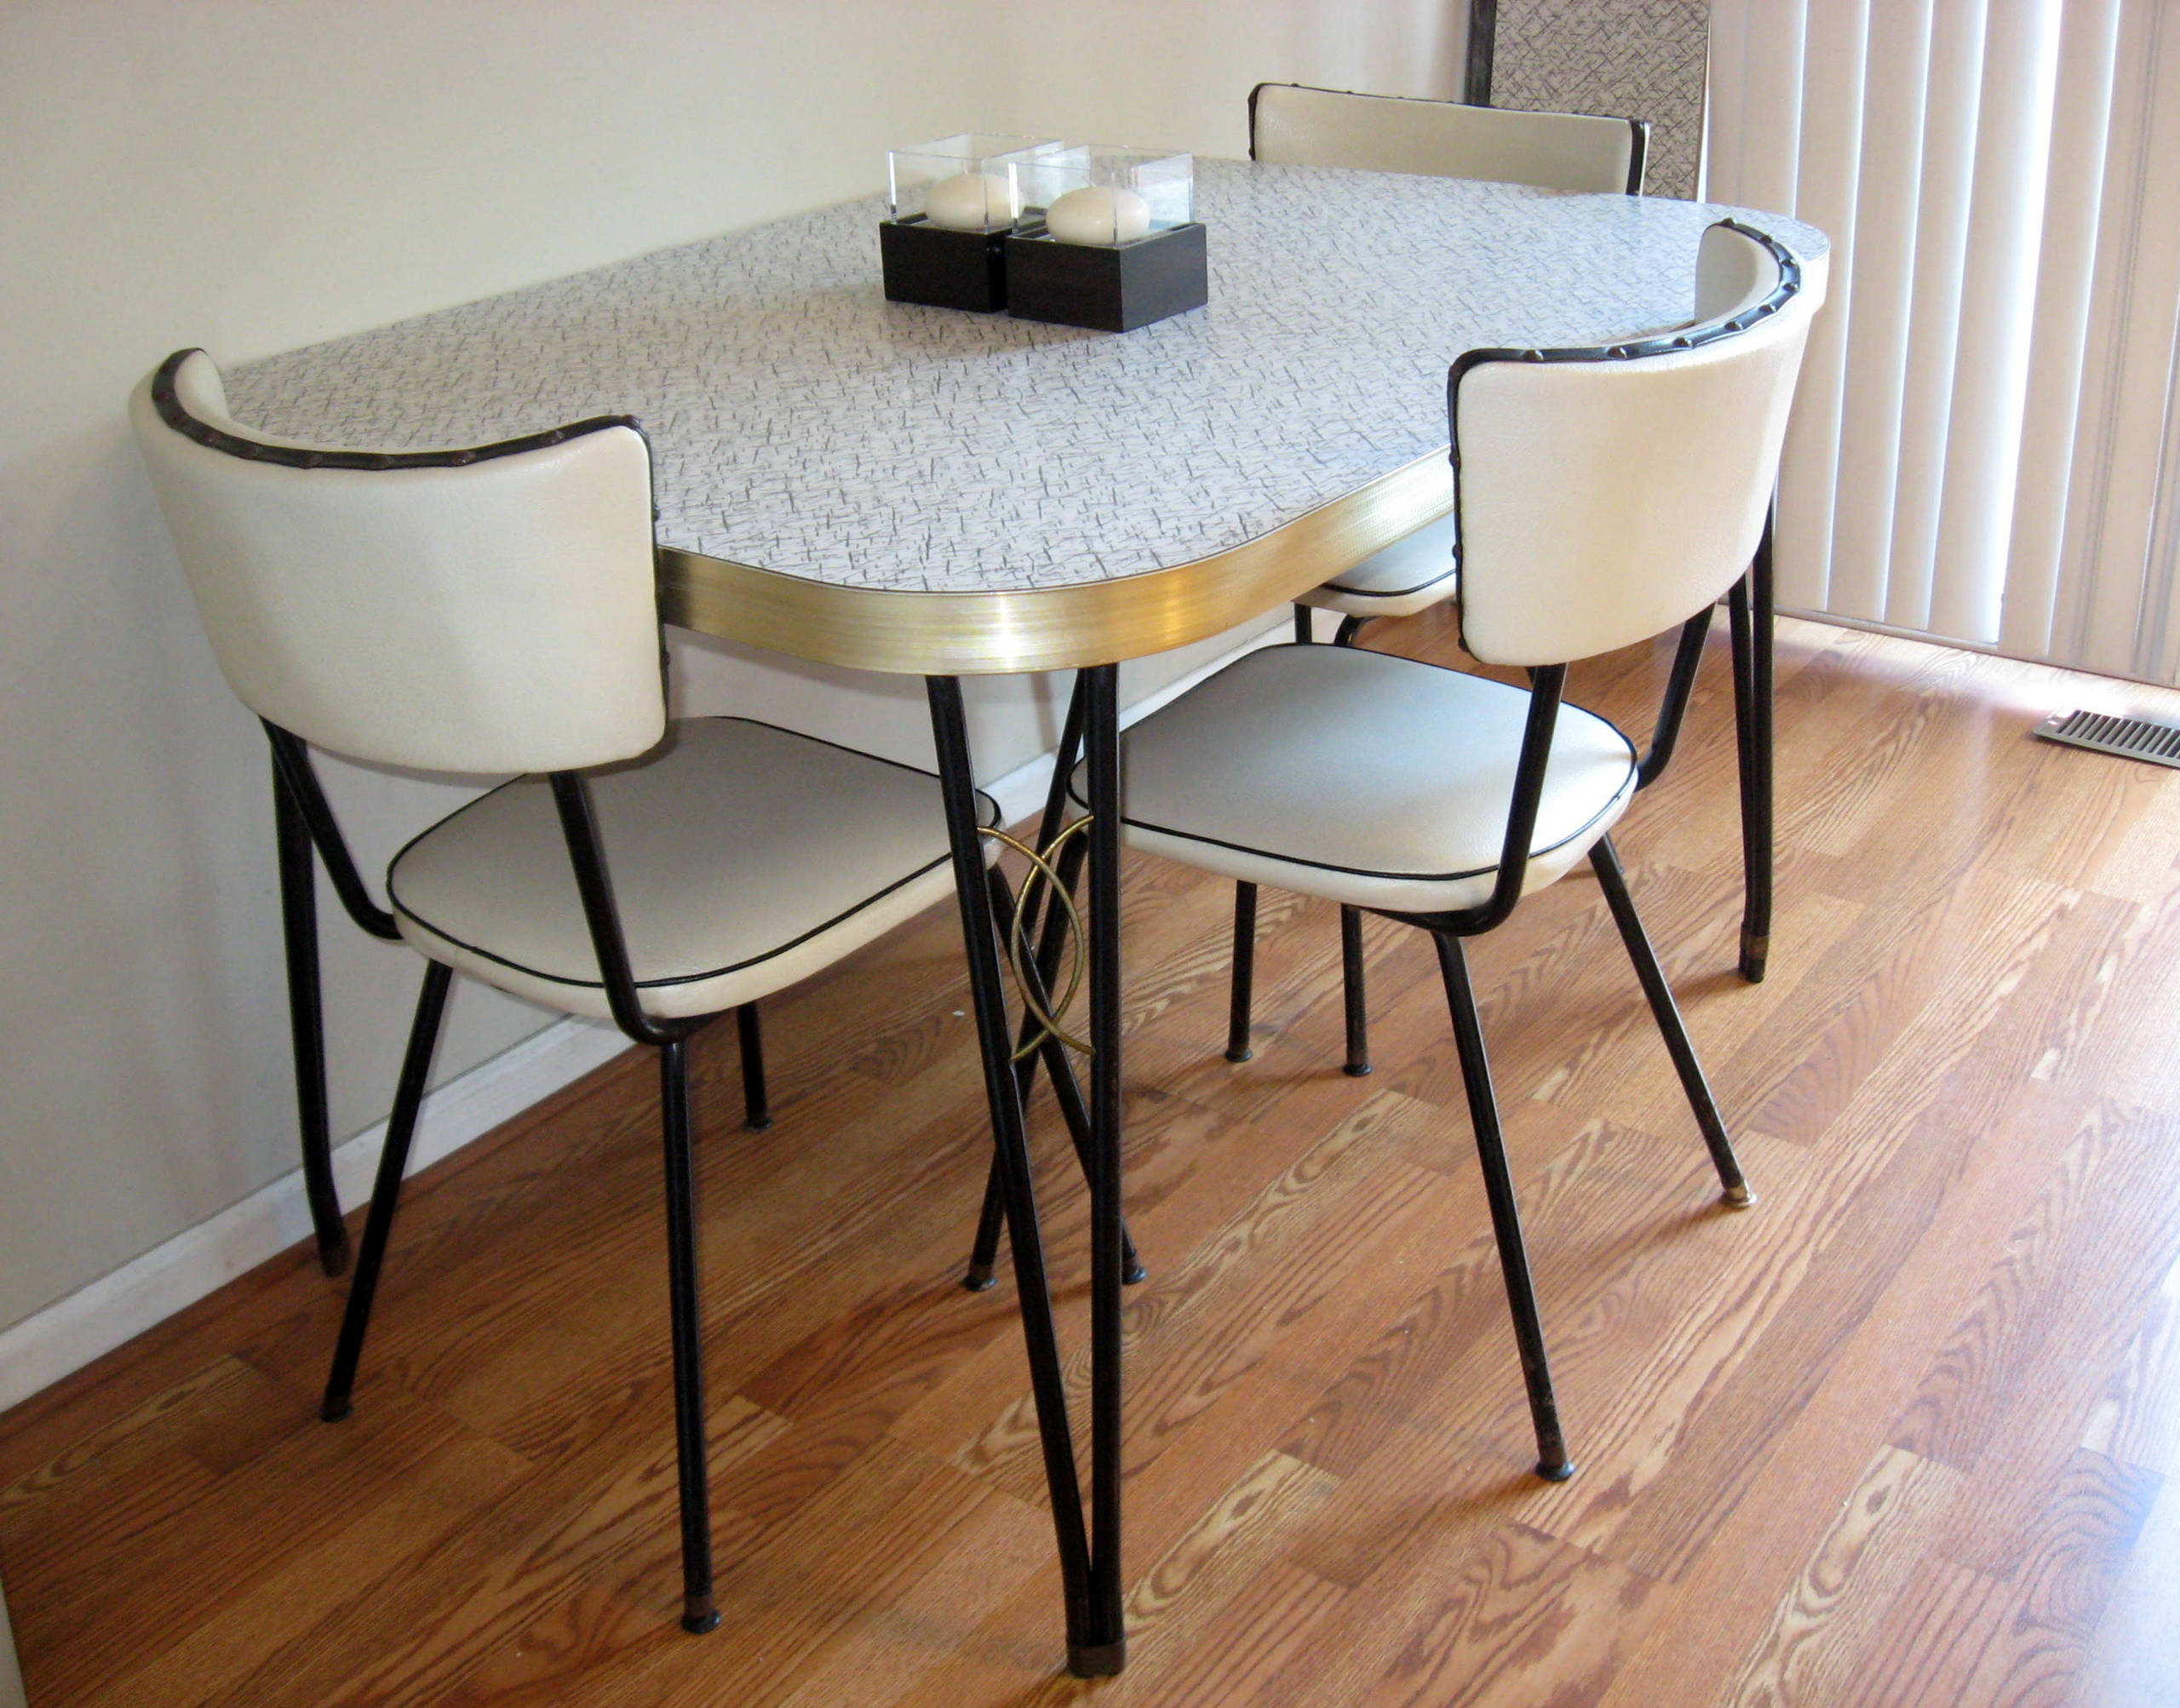 Retro Kitchen Table And Chairs Visualhunt, Retro Metal Dining Table And Chairs